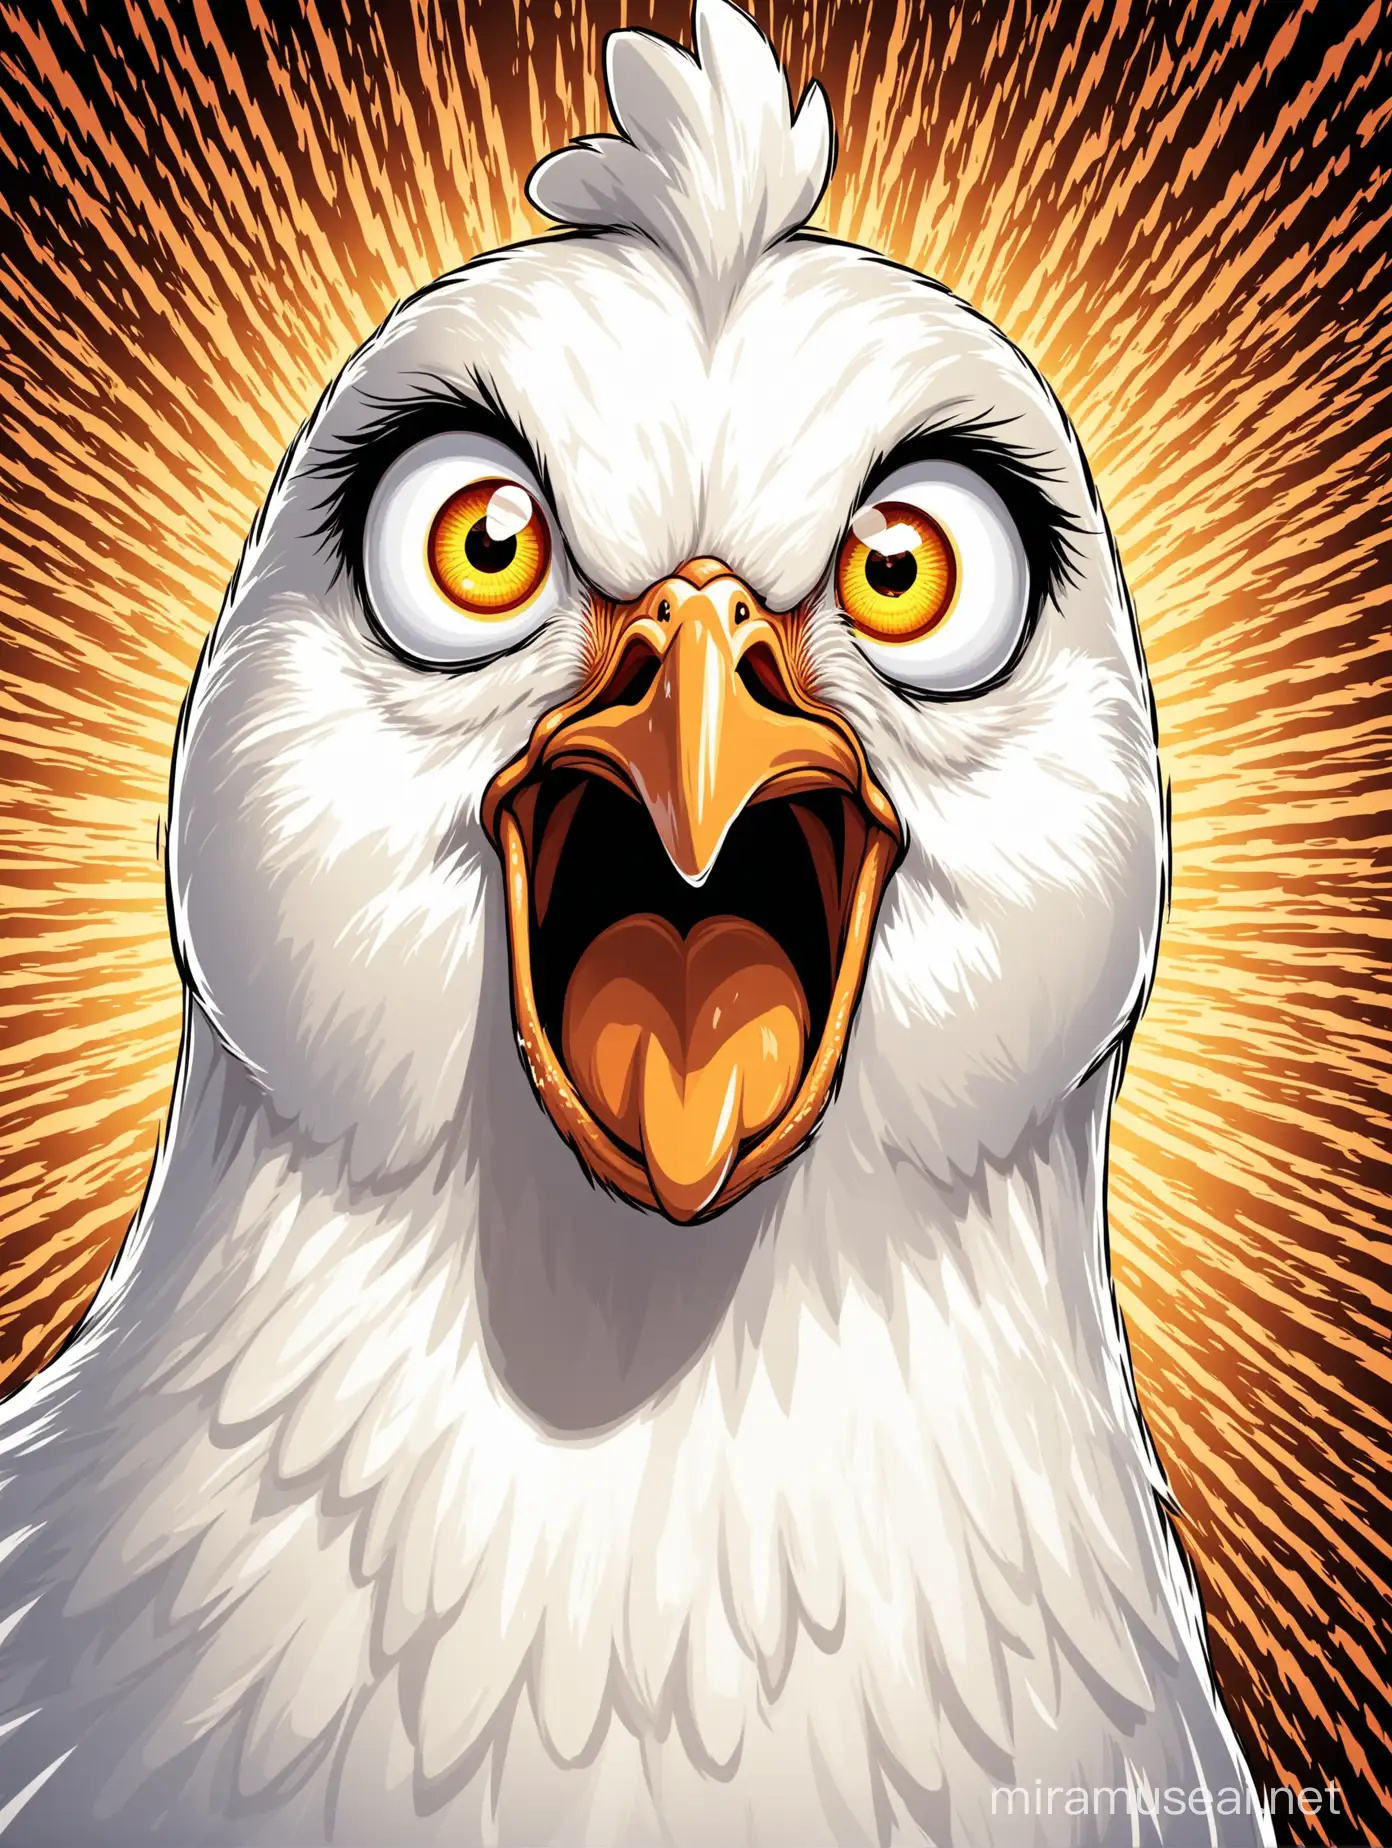 Make cartoon image of the head of a white chicken with crazy eyes